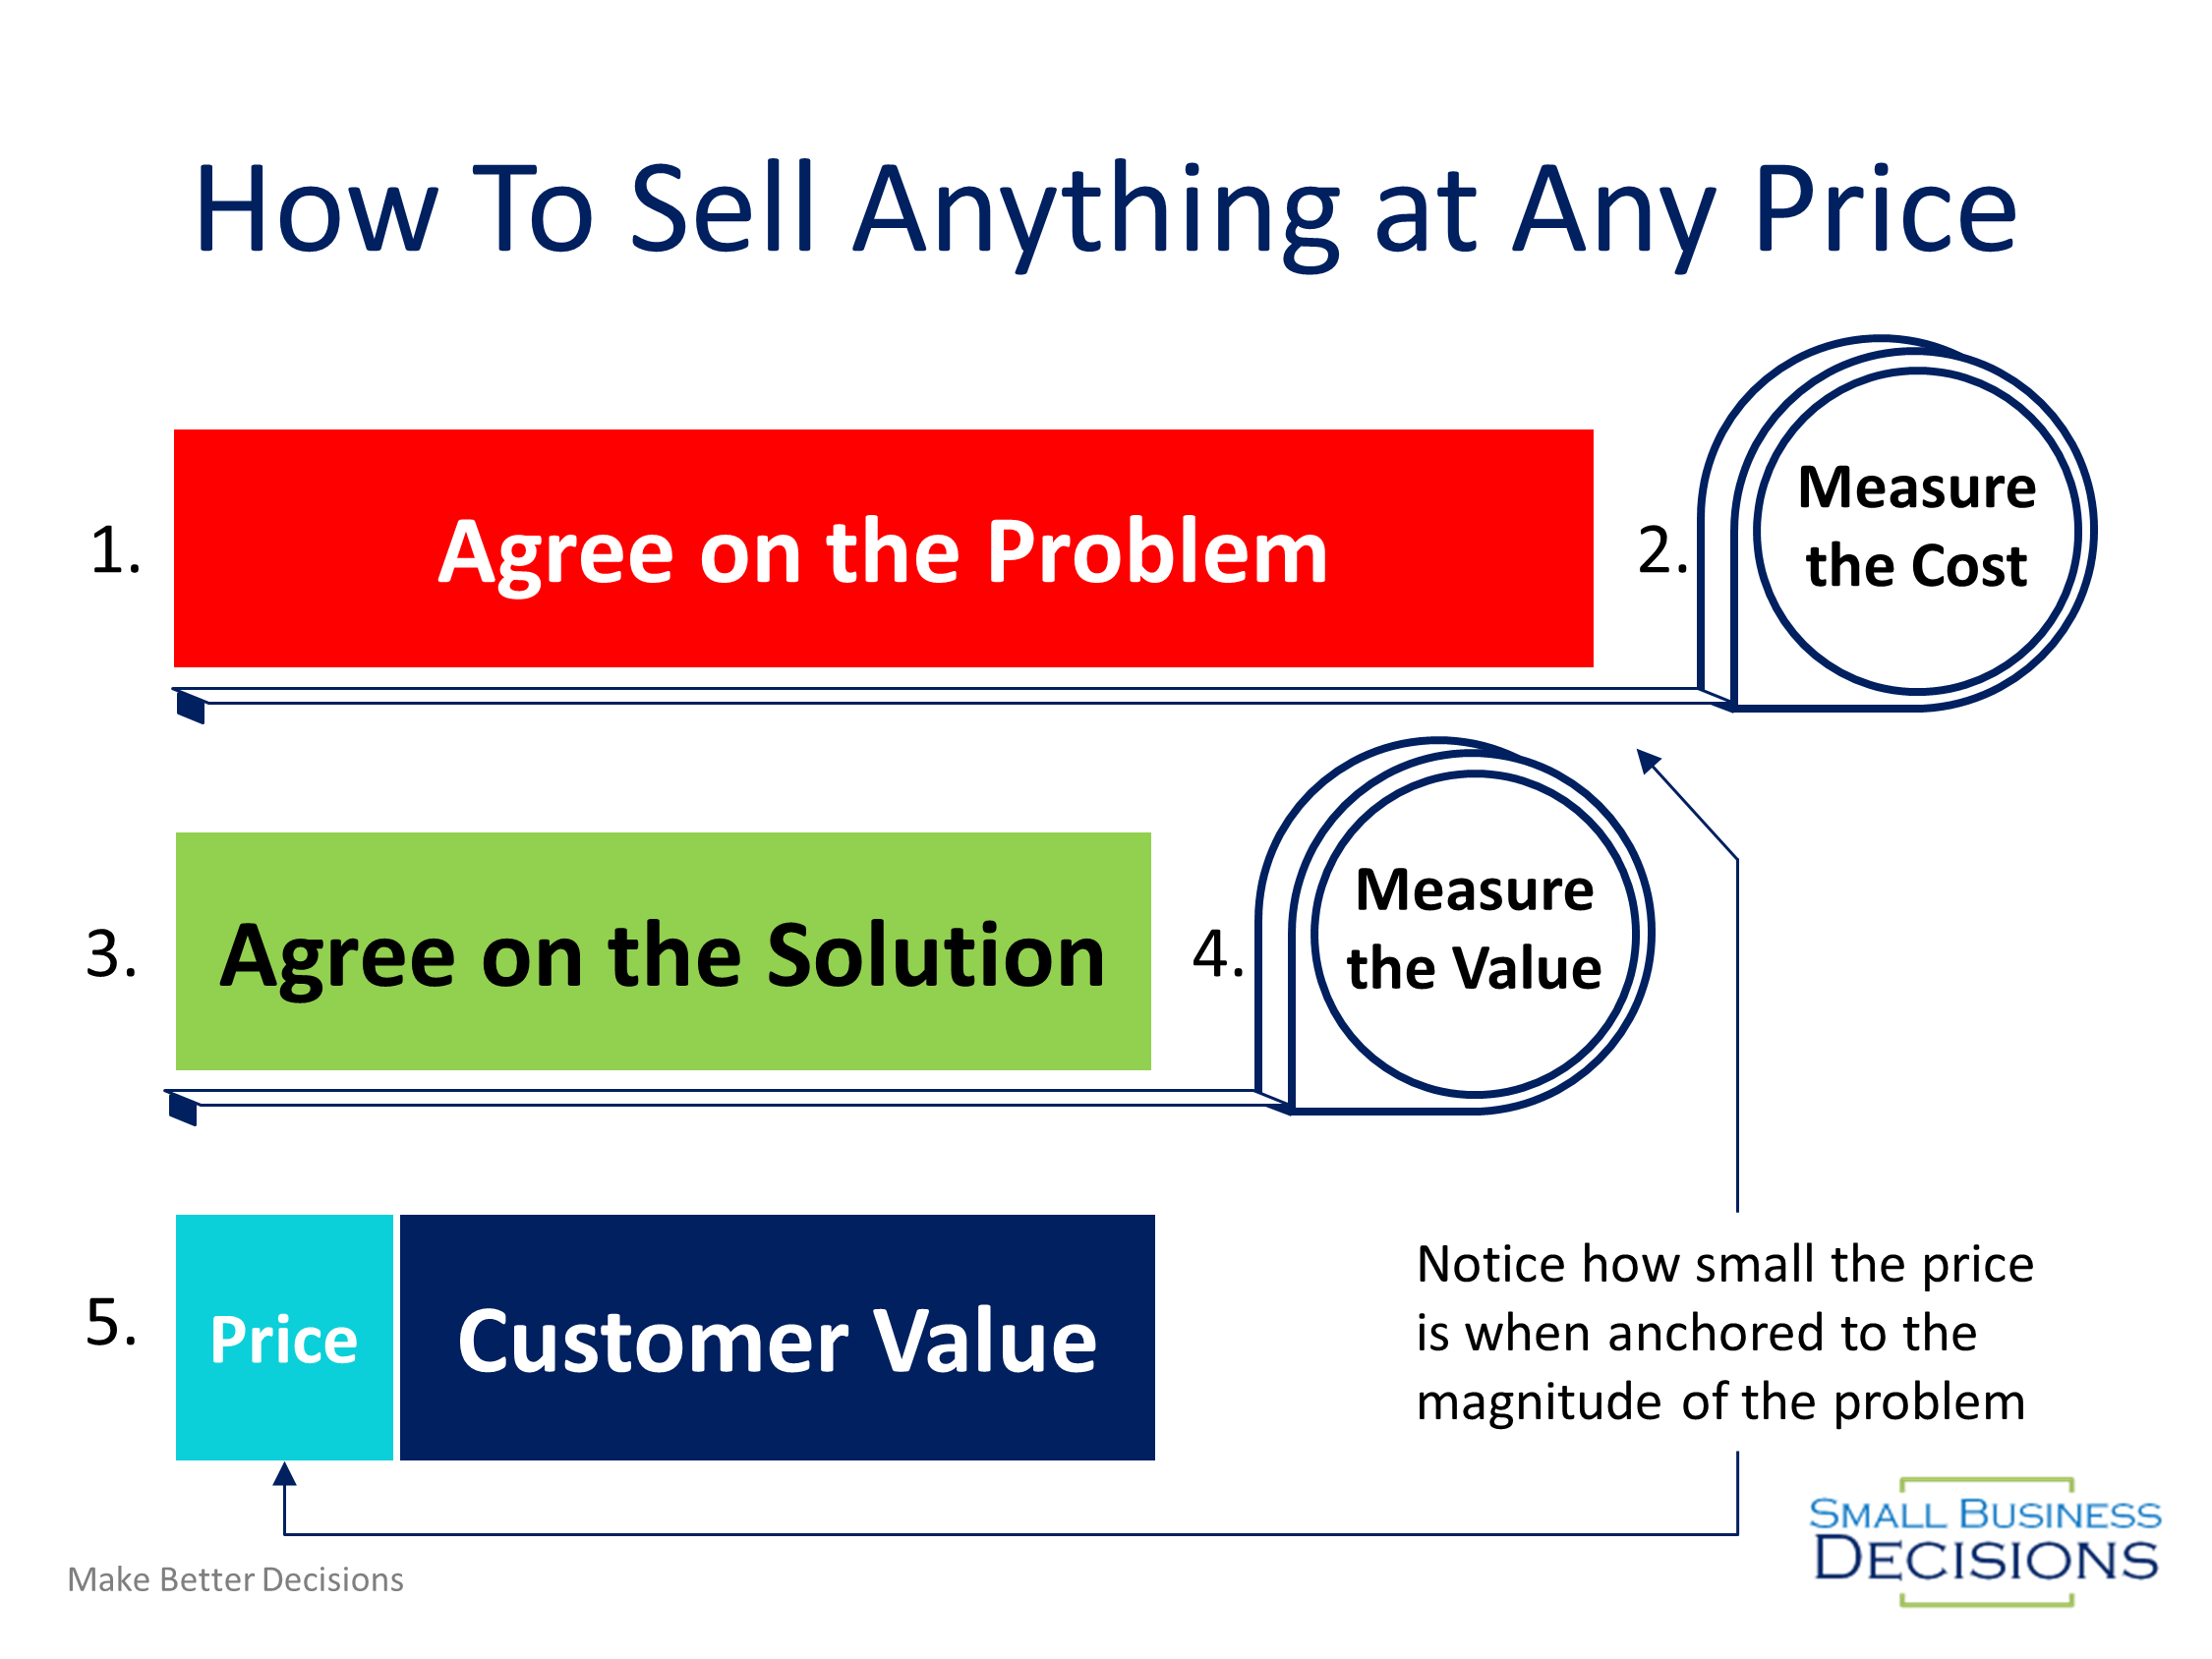 How to Sell Anything at Any Price